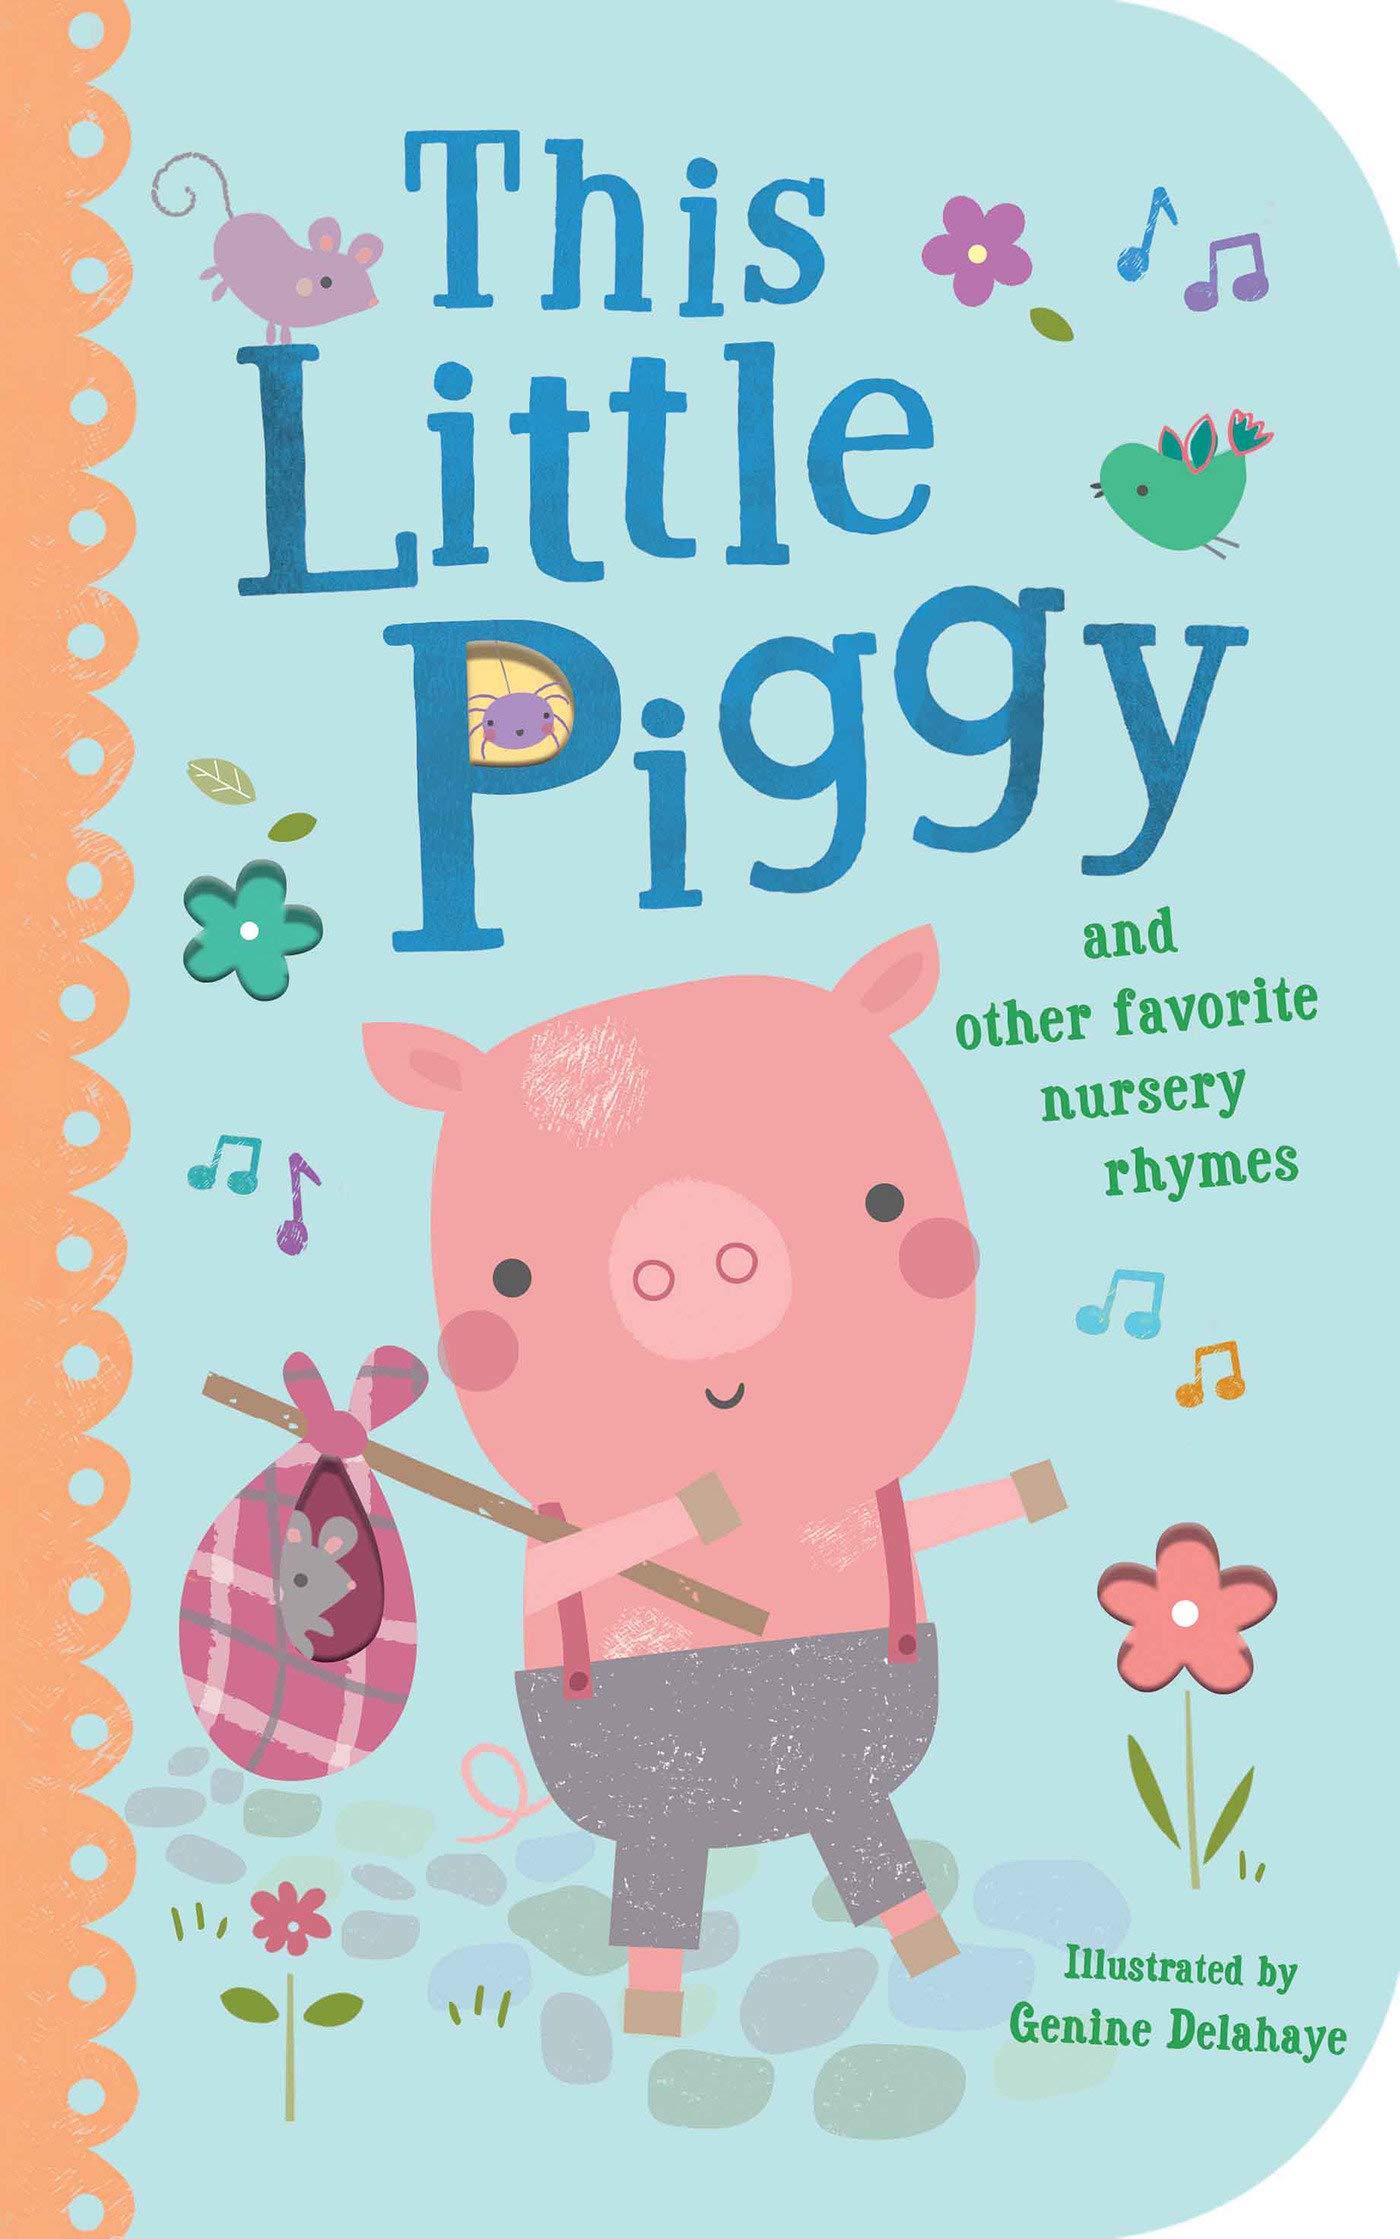 This Little Piggy: and Other Favorite Nursery Rhymes